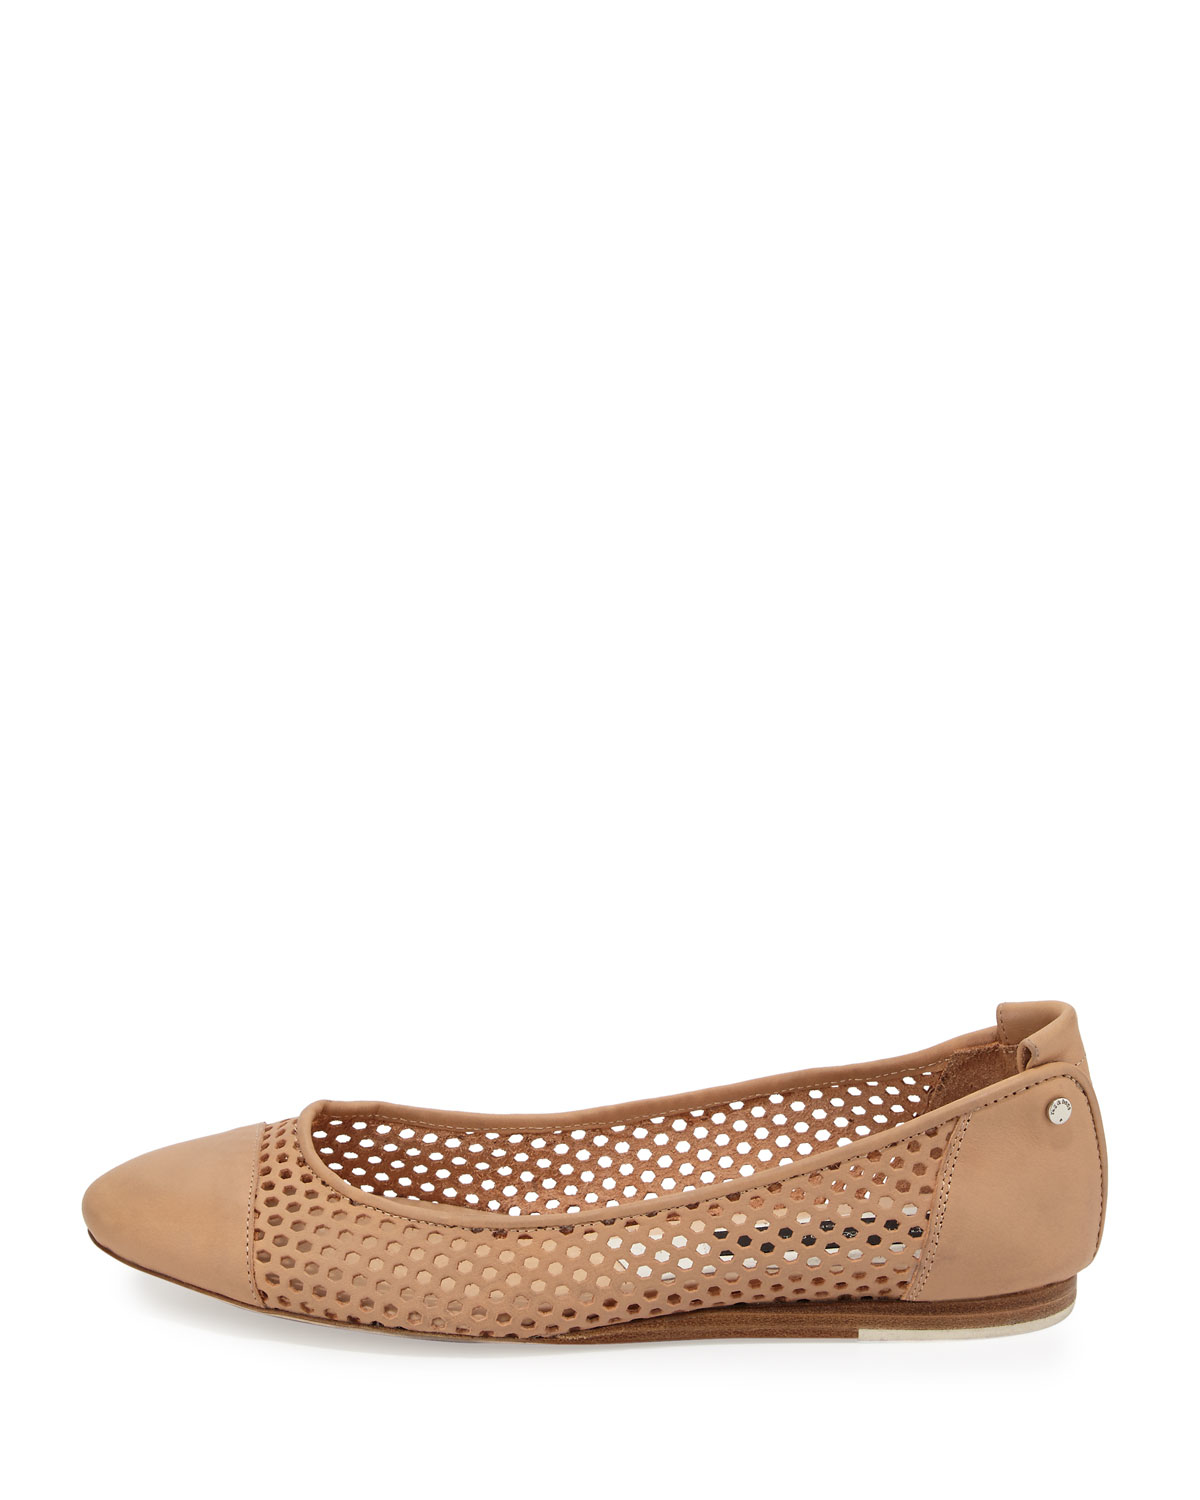 Rag & Bone Sybil Perforated-Leather Ballet Flats in Tan (Brown) - Lyst